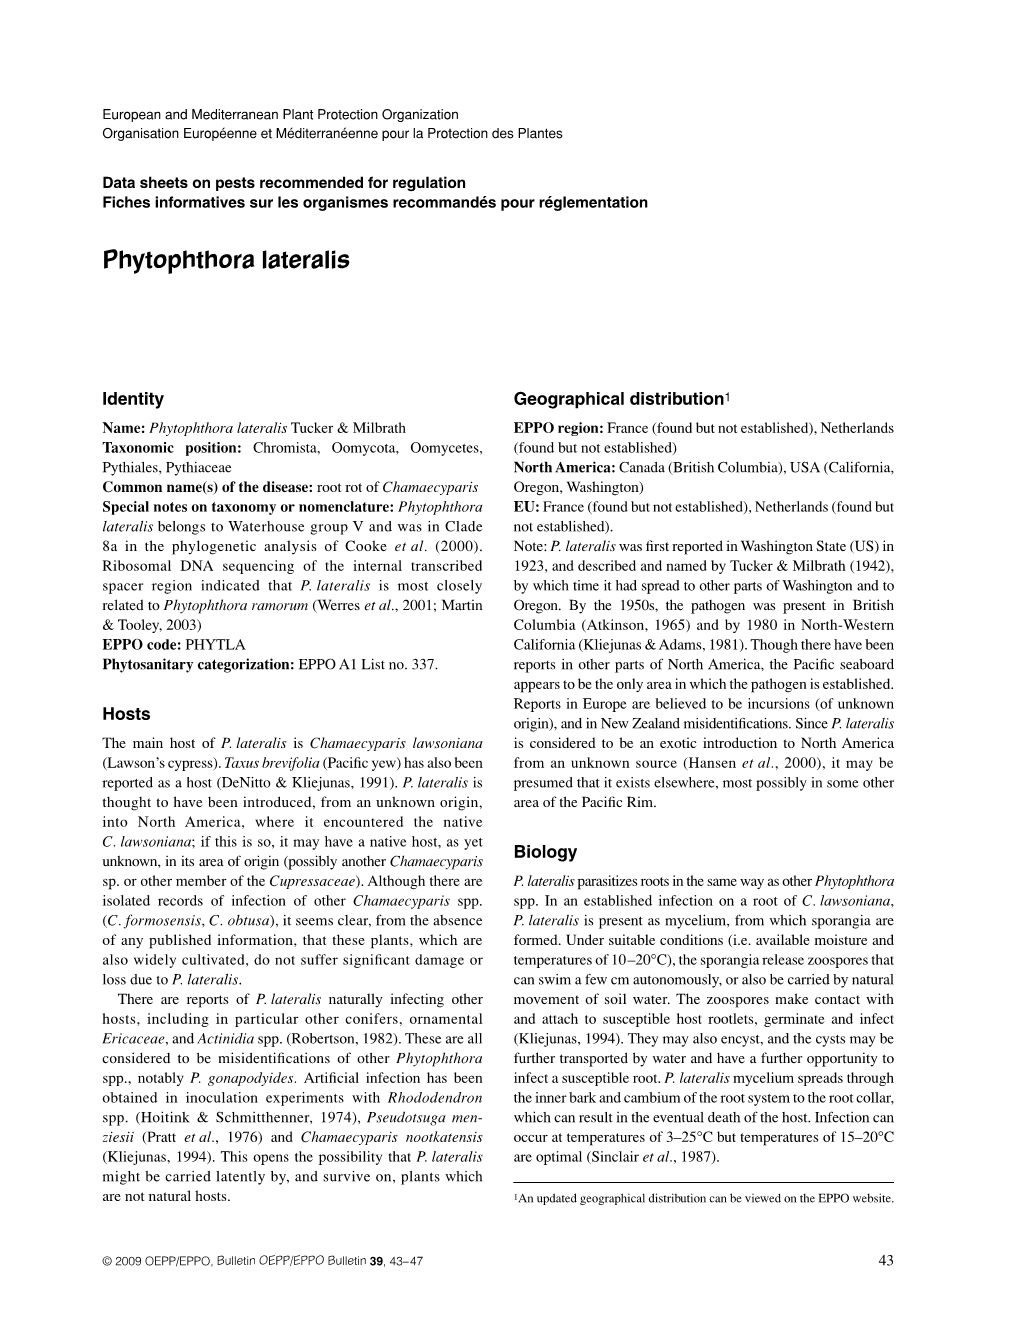 Phytophthora Lateralis